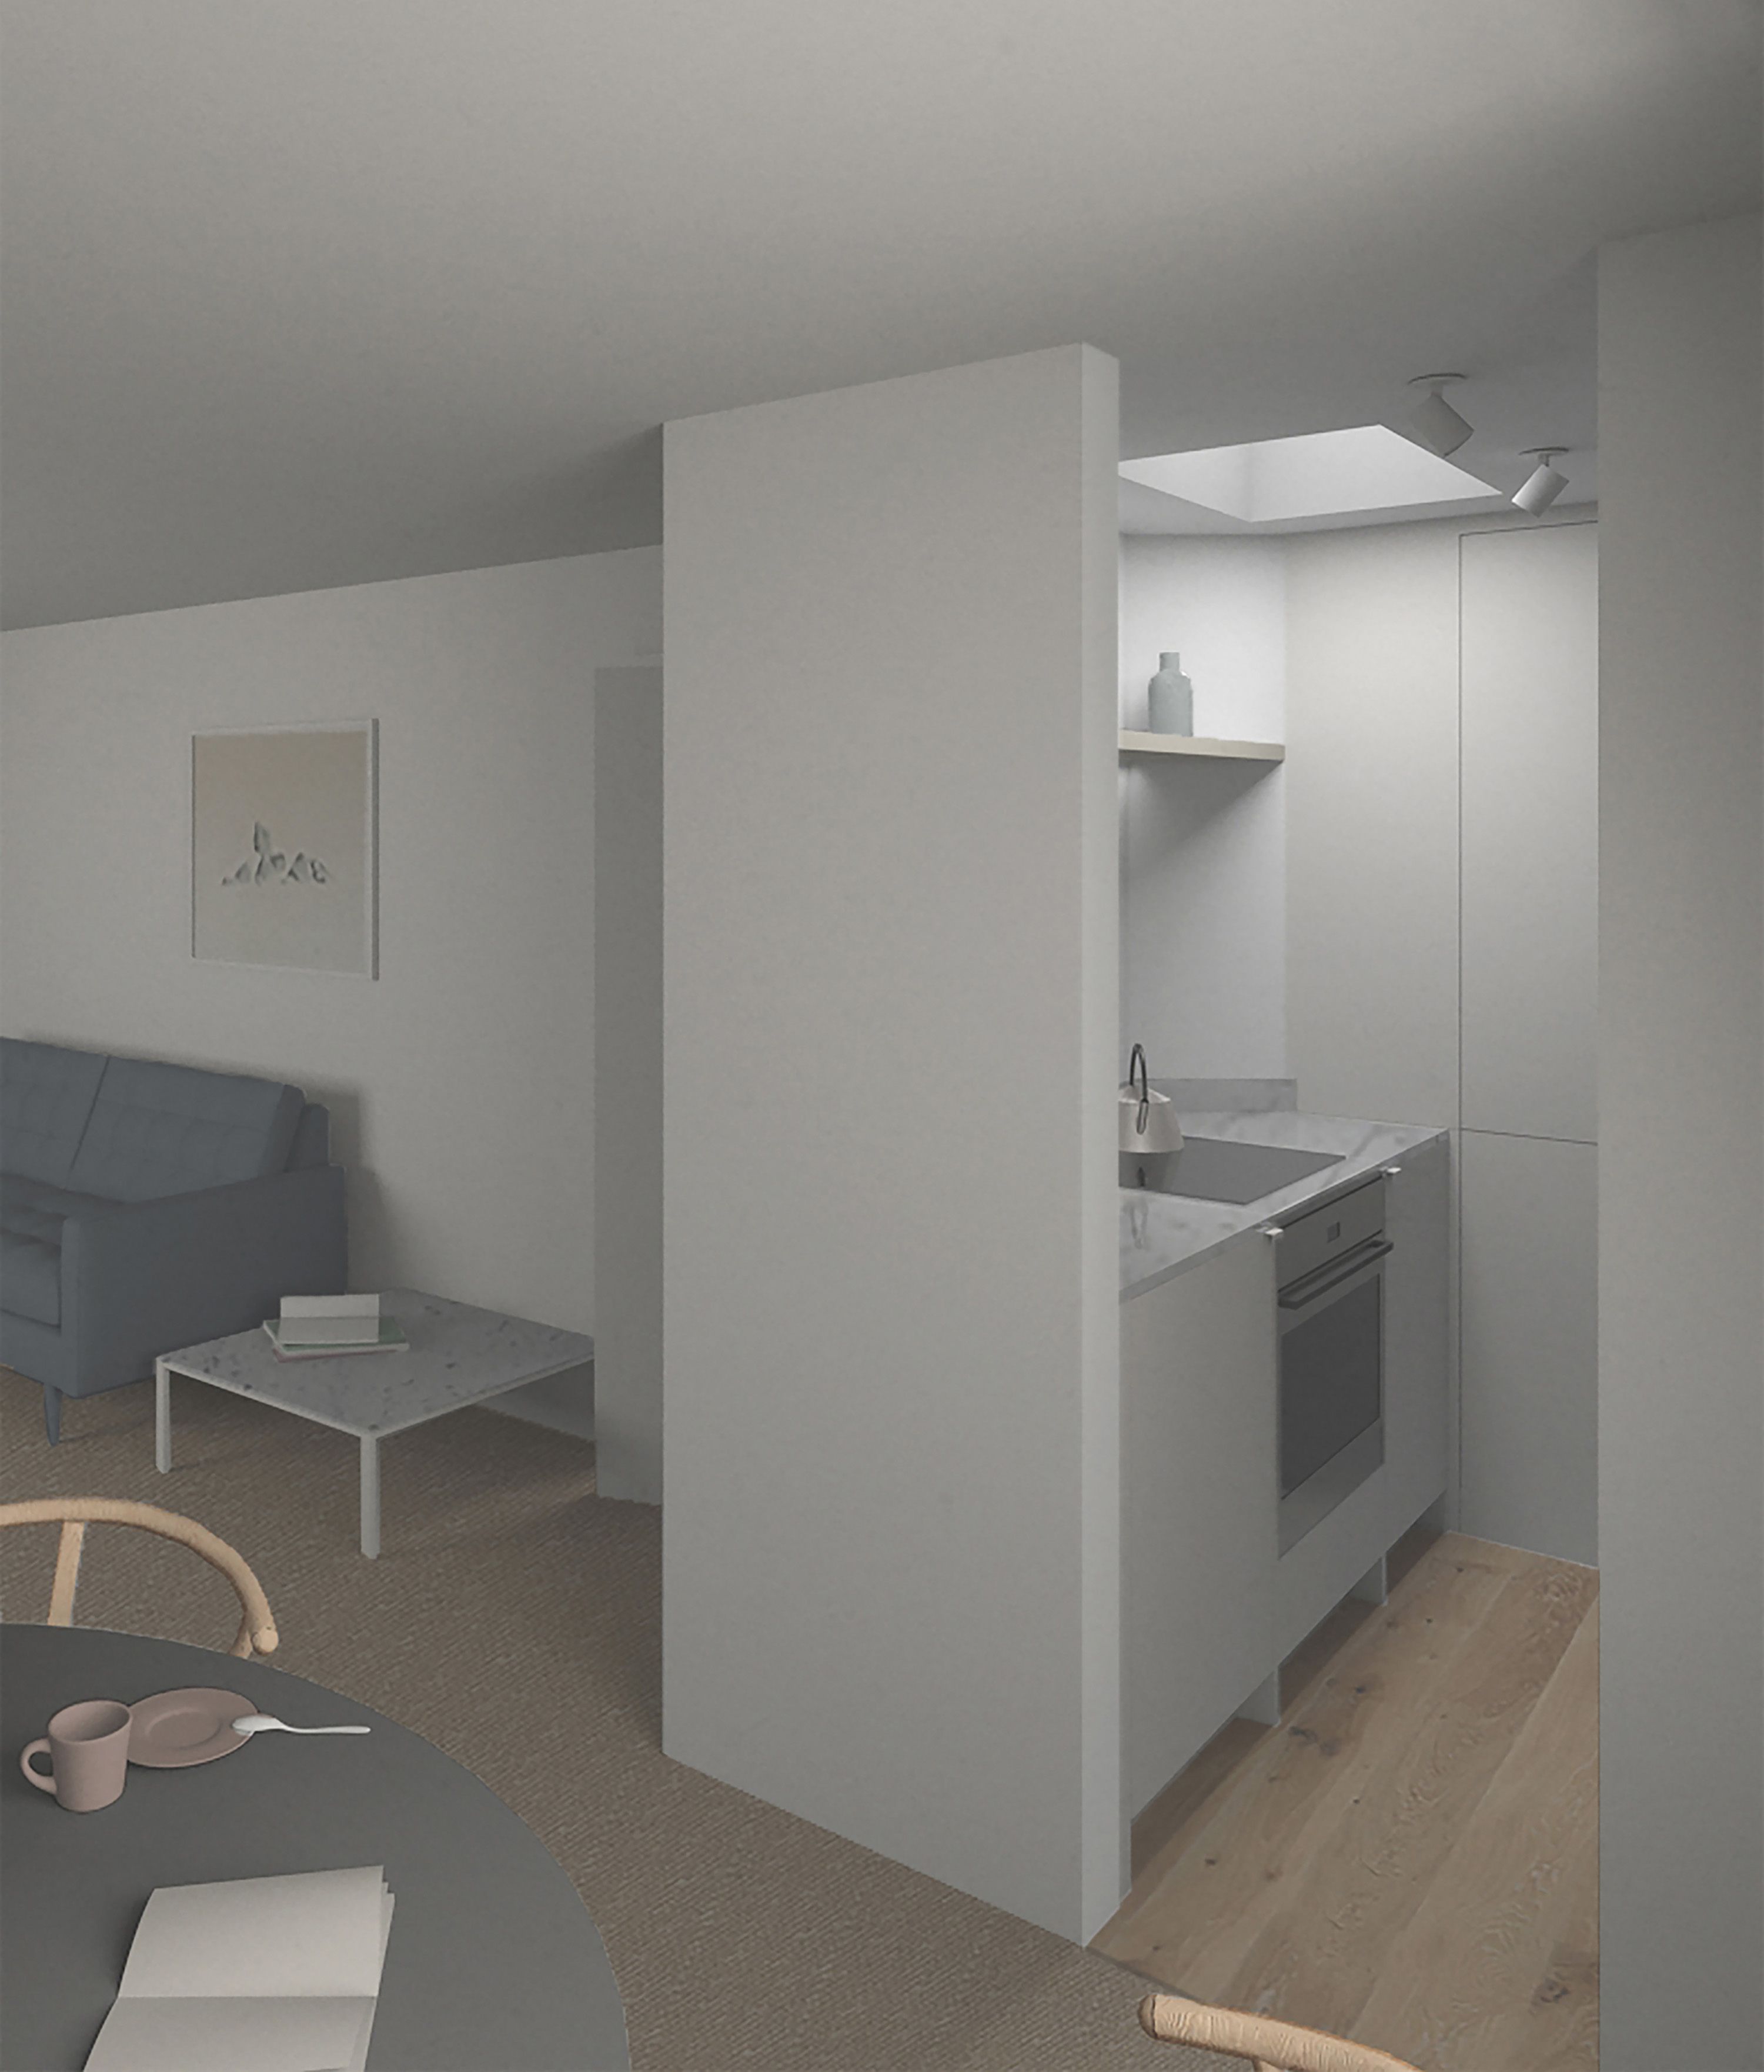 Proposed interior view for From Kitchens Thornhill Kitchen project.